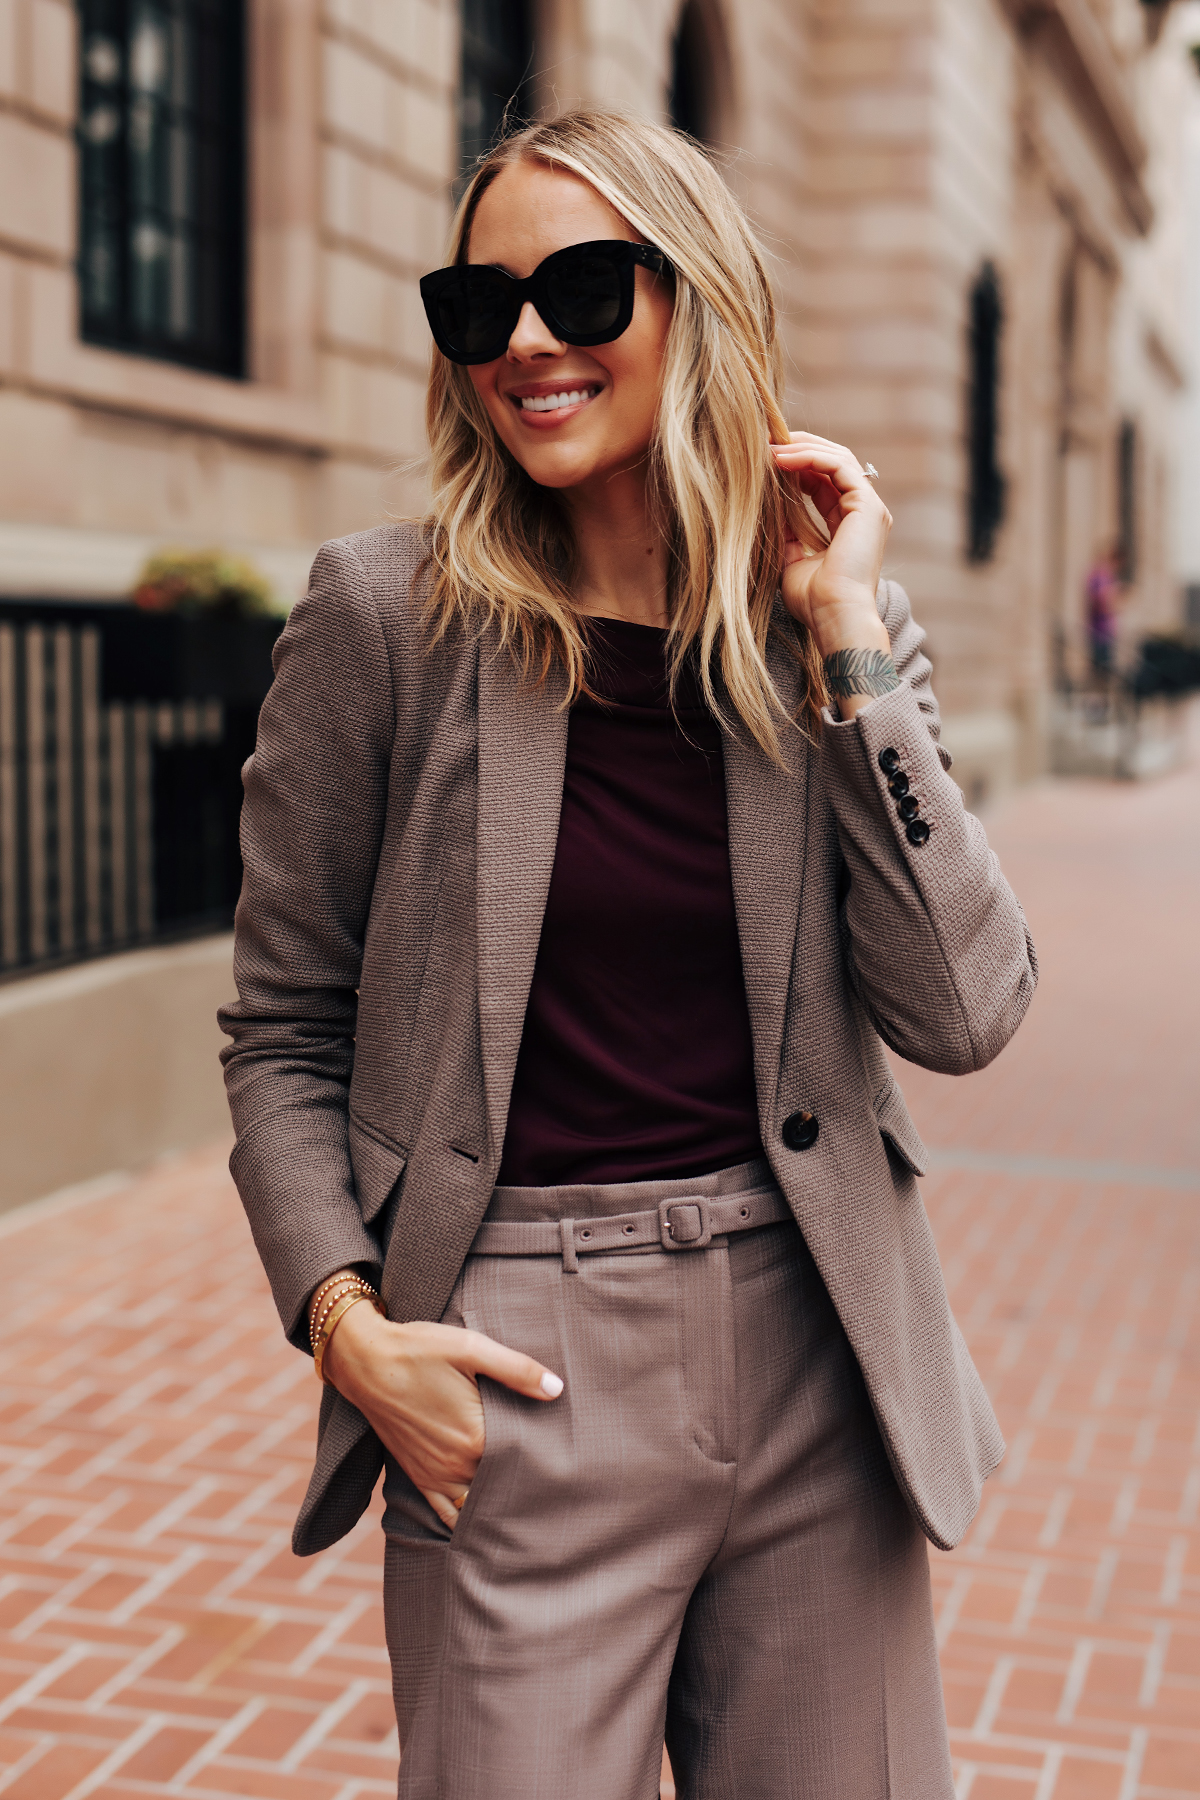 Fashion Jackson Wearing Ann Taylor Taupe Blazer Purple Top Taupe Belted Pants Fall Workwear Outfit